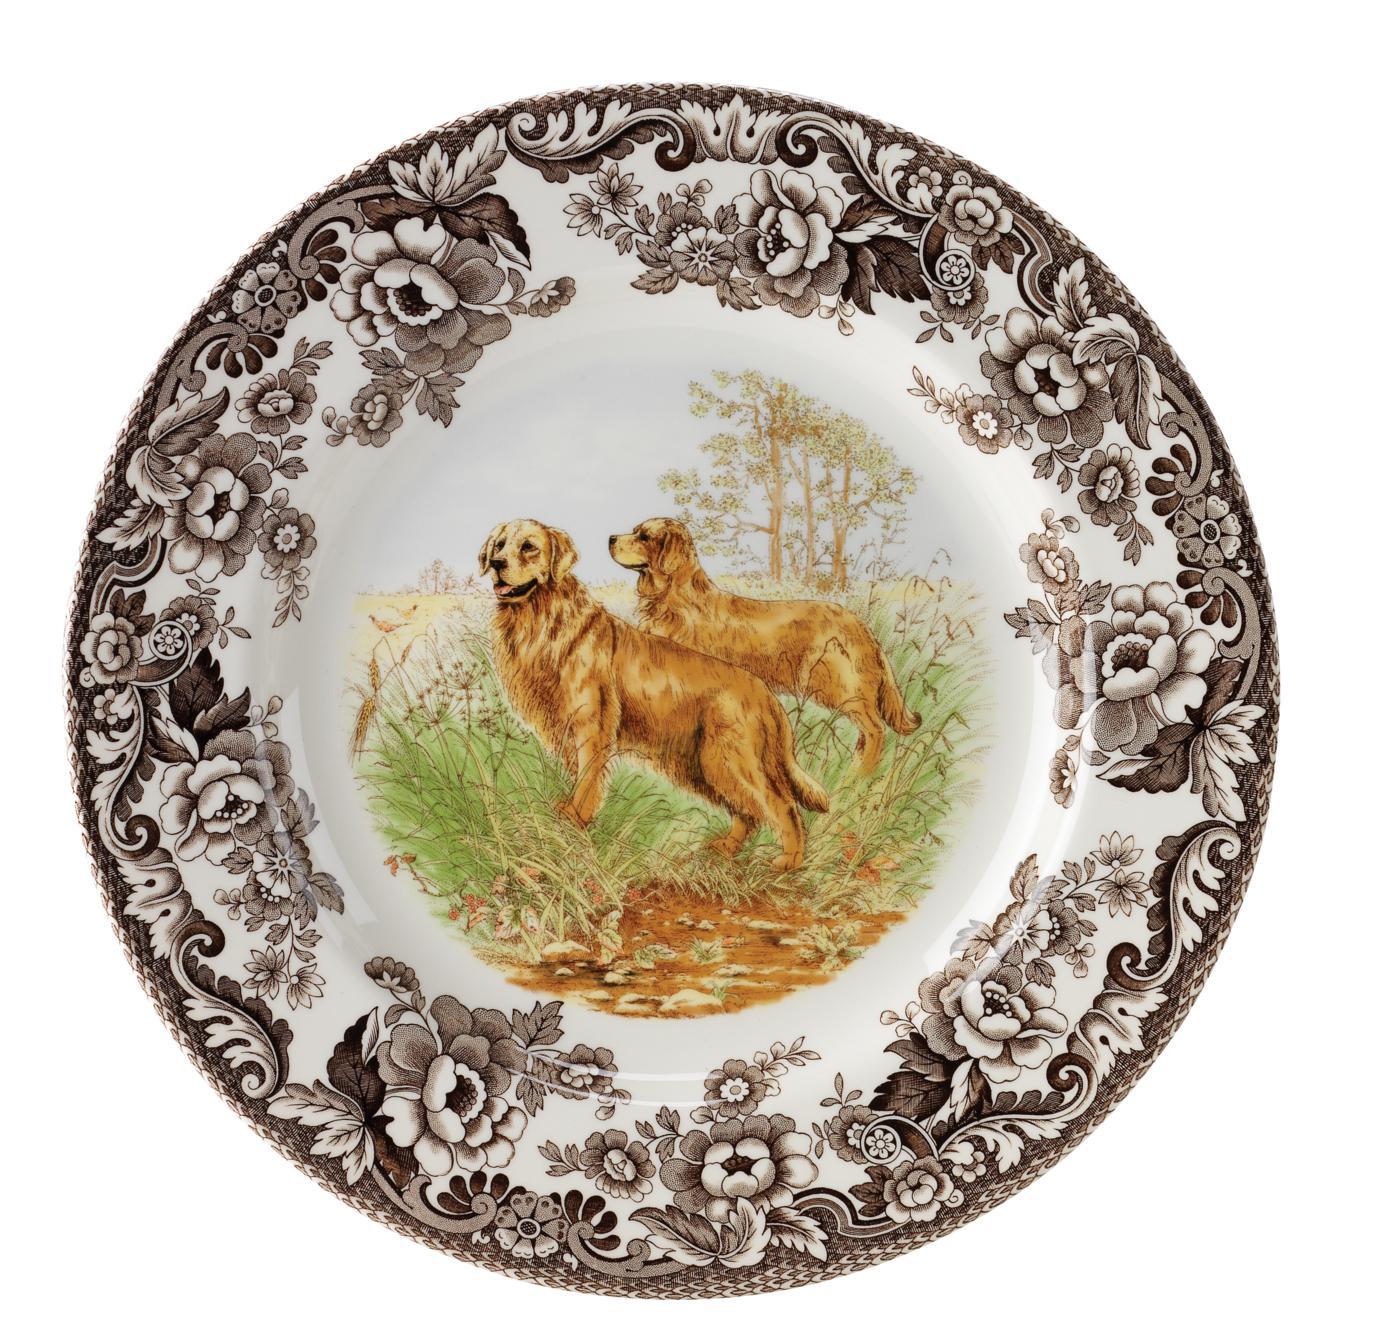 Woodland Salad Plate 8 Inch, Golden Retriever image number null